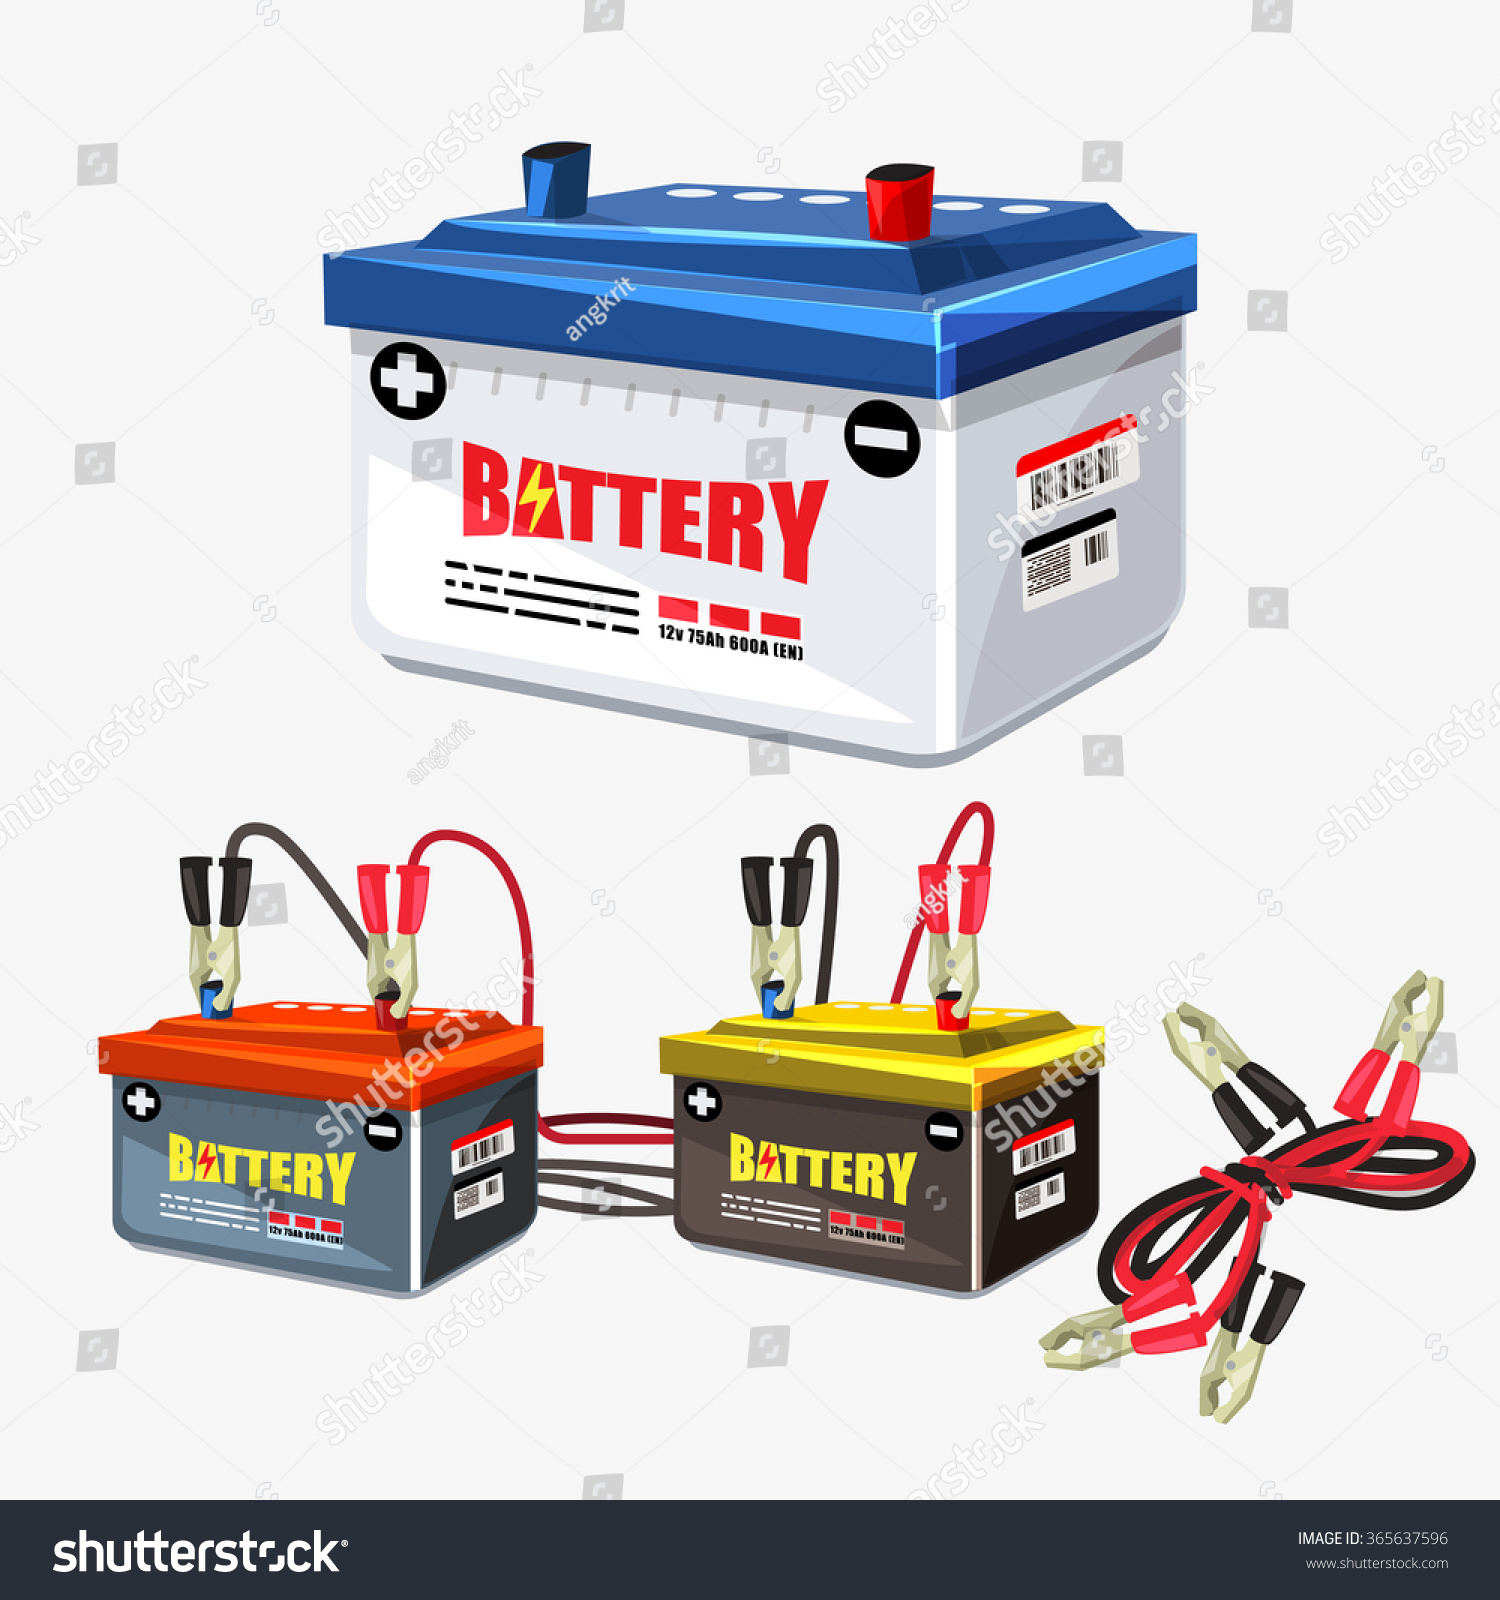 free car battery clipart - photo #39